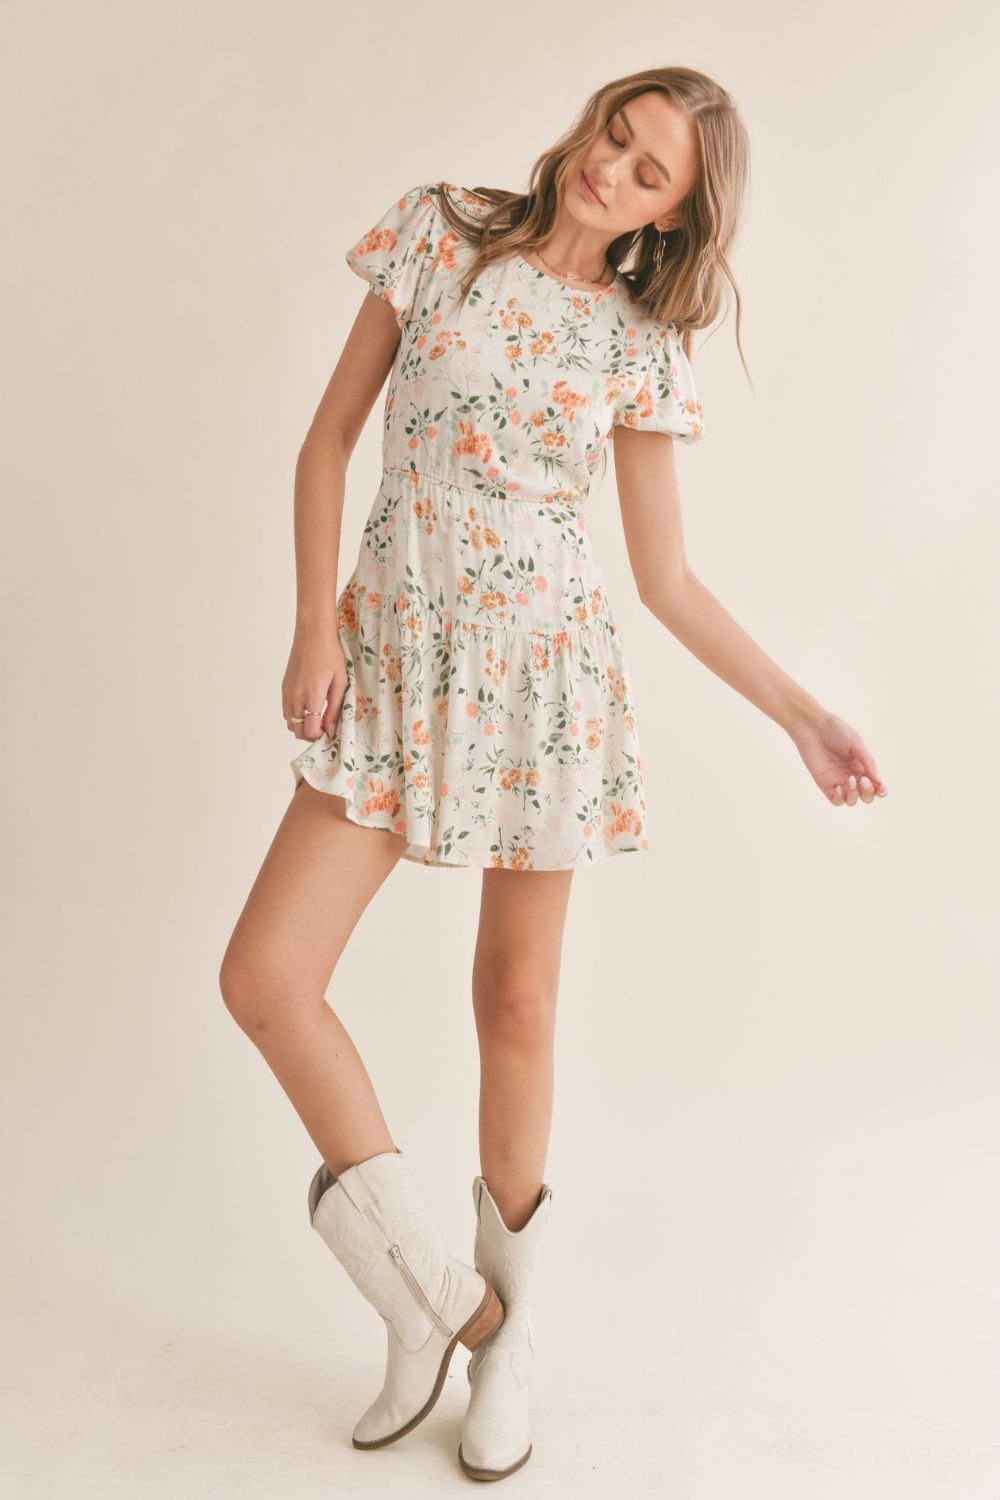 Women&#39;s French Country Bloom Cut Out Floral Mini Dress | IvoryMulti - Women&#39;s Dresses - Blooming Daily